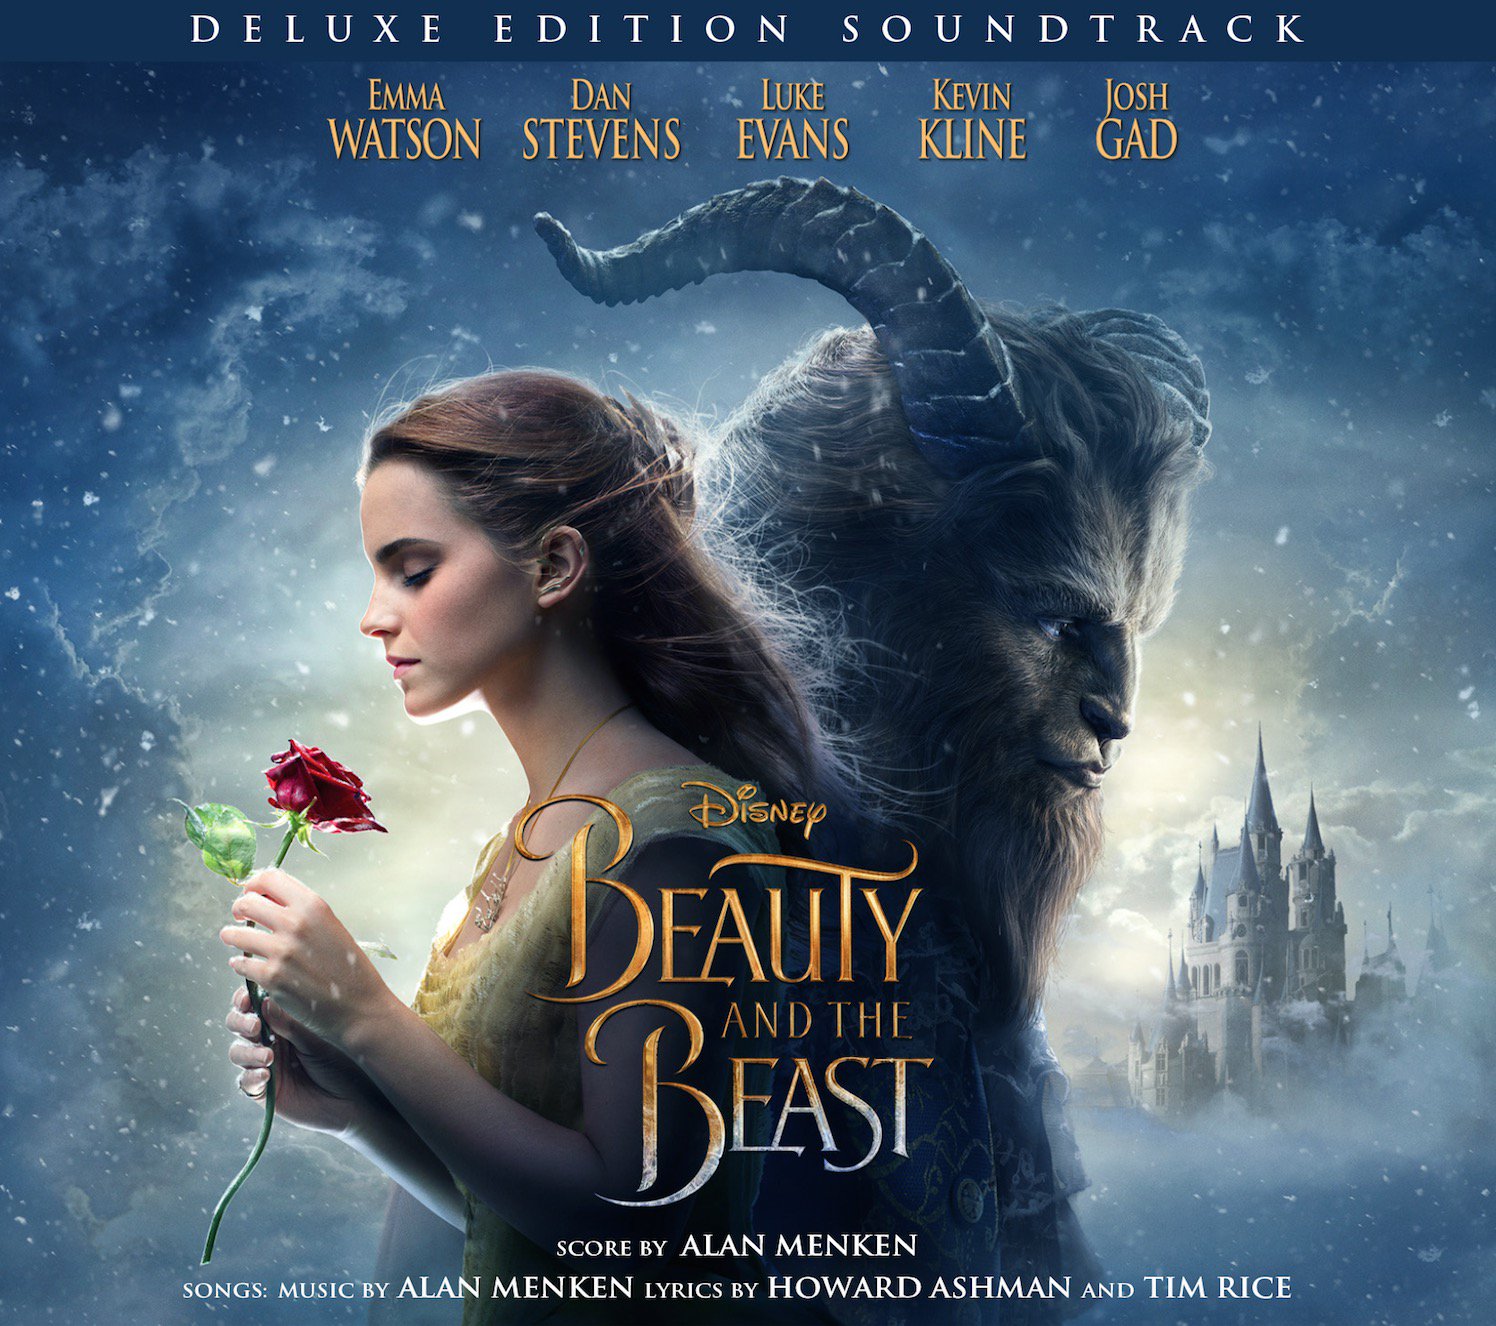 Celine Dion I M Thrilled To Announce That I Ll Be Performing A New Song How Does A Moment Last Forever For Disney S Beauty And The Beast Celine T Co Opewlb8lhm